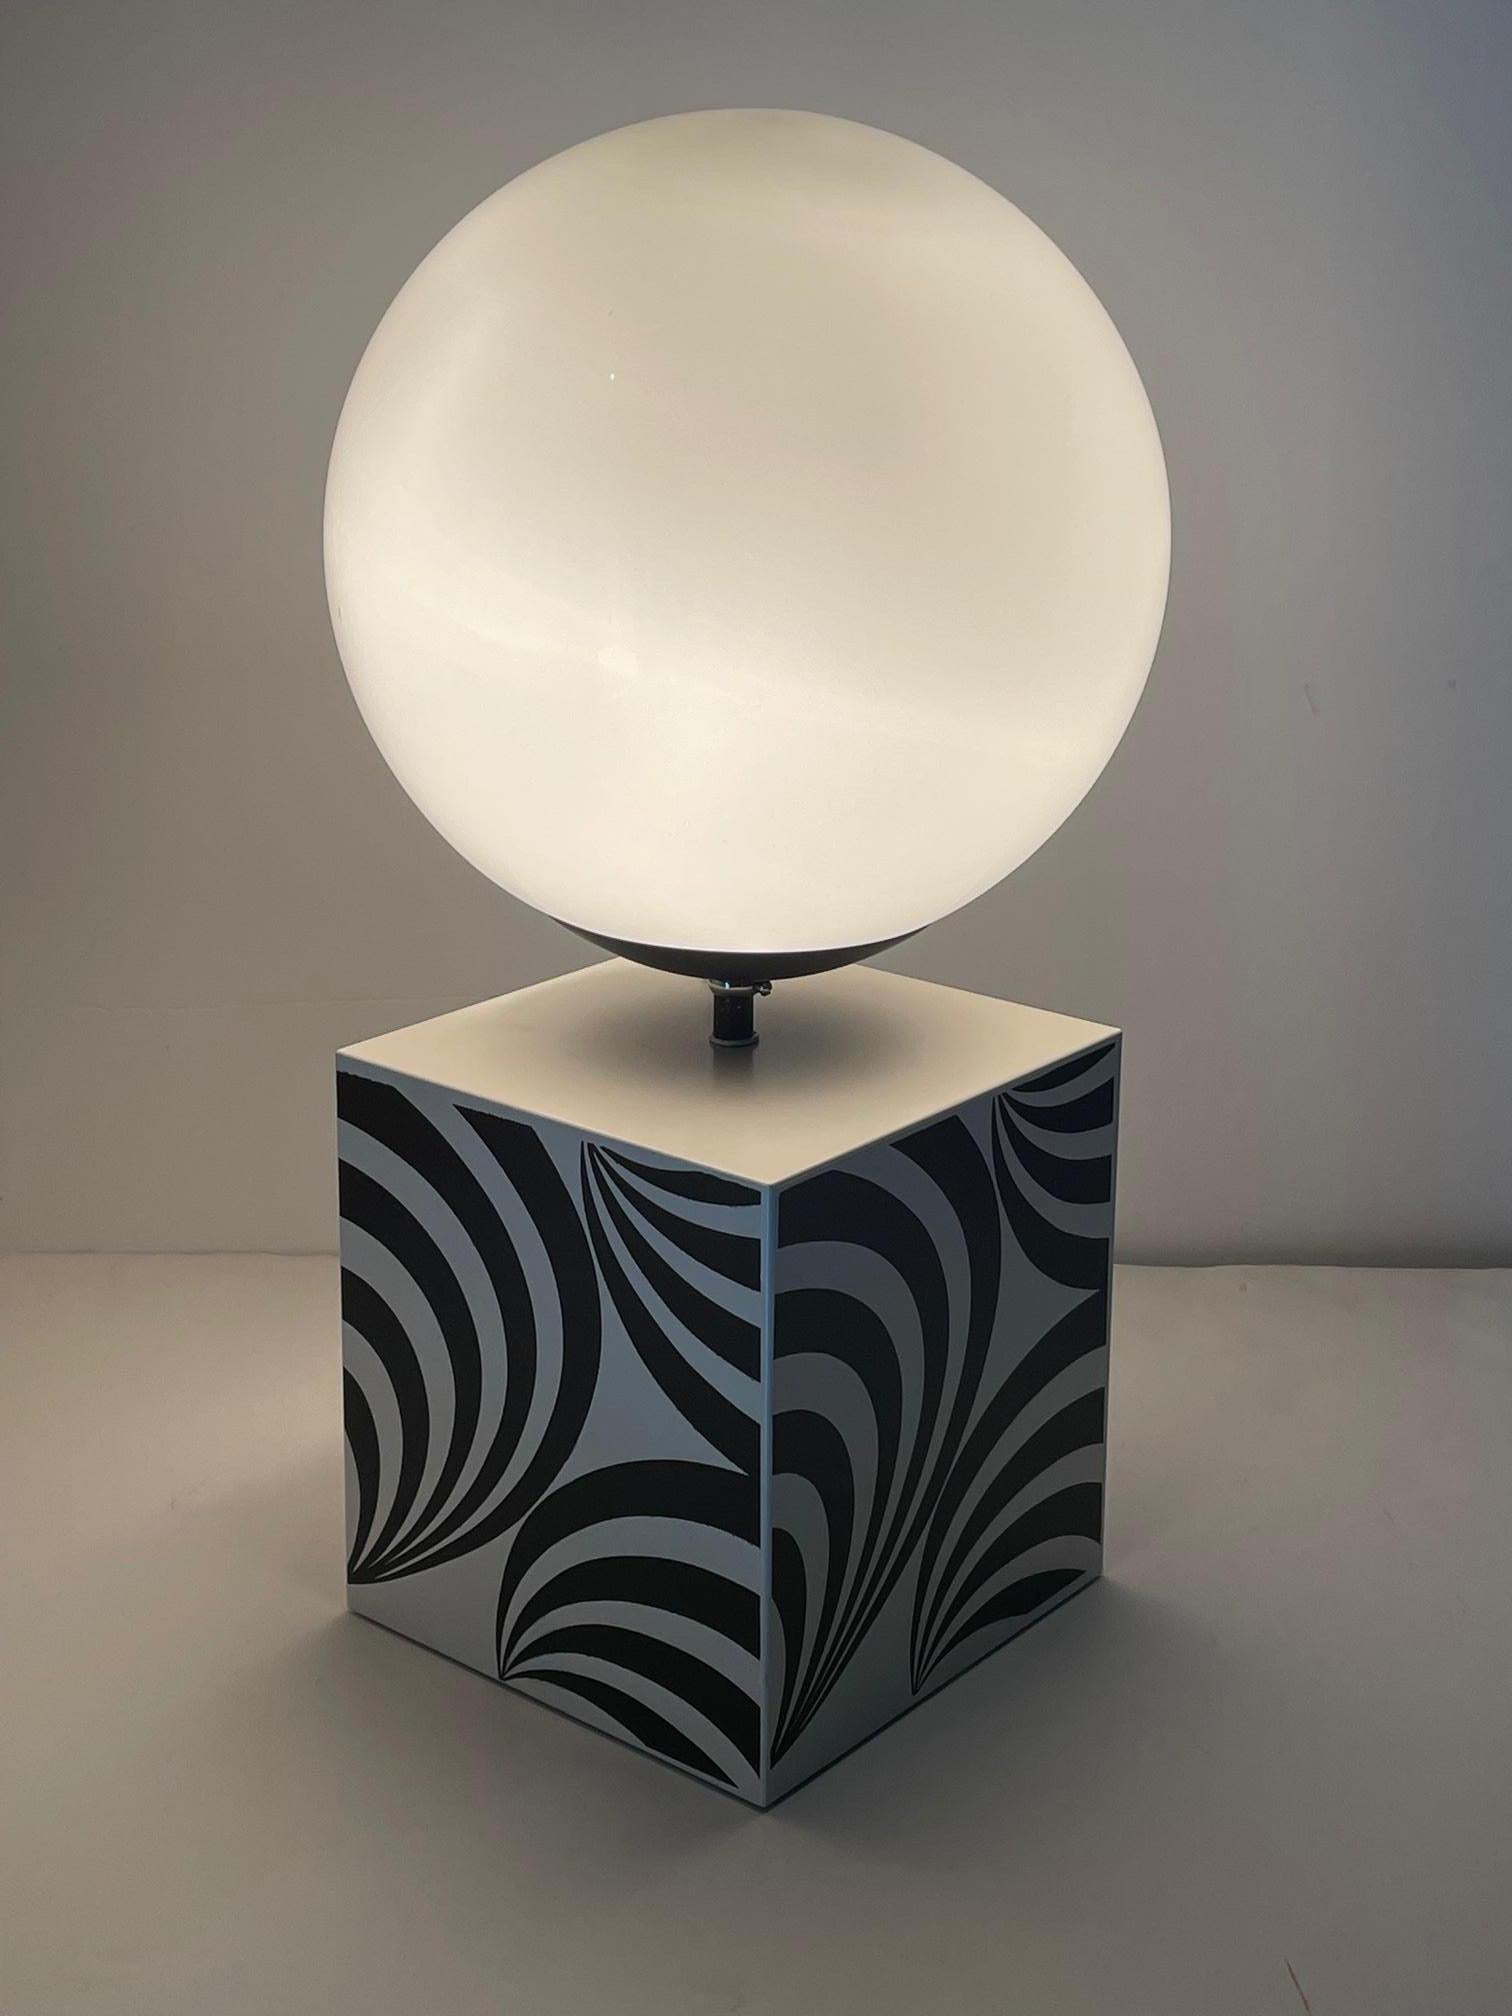 Super funky table lamp, or is it art? The base is a black and white op art decorated cube with glowing round milk glass globe mounted on top. Austin Powers would love this groovy treasure.
Base 7.25 x 7.25
Globe is 9